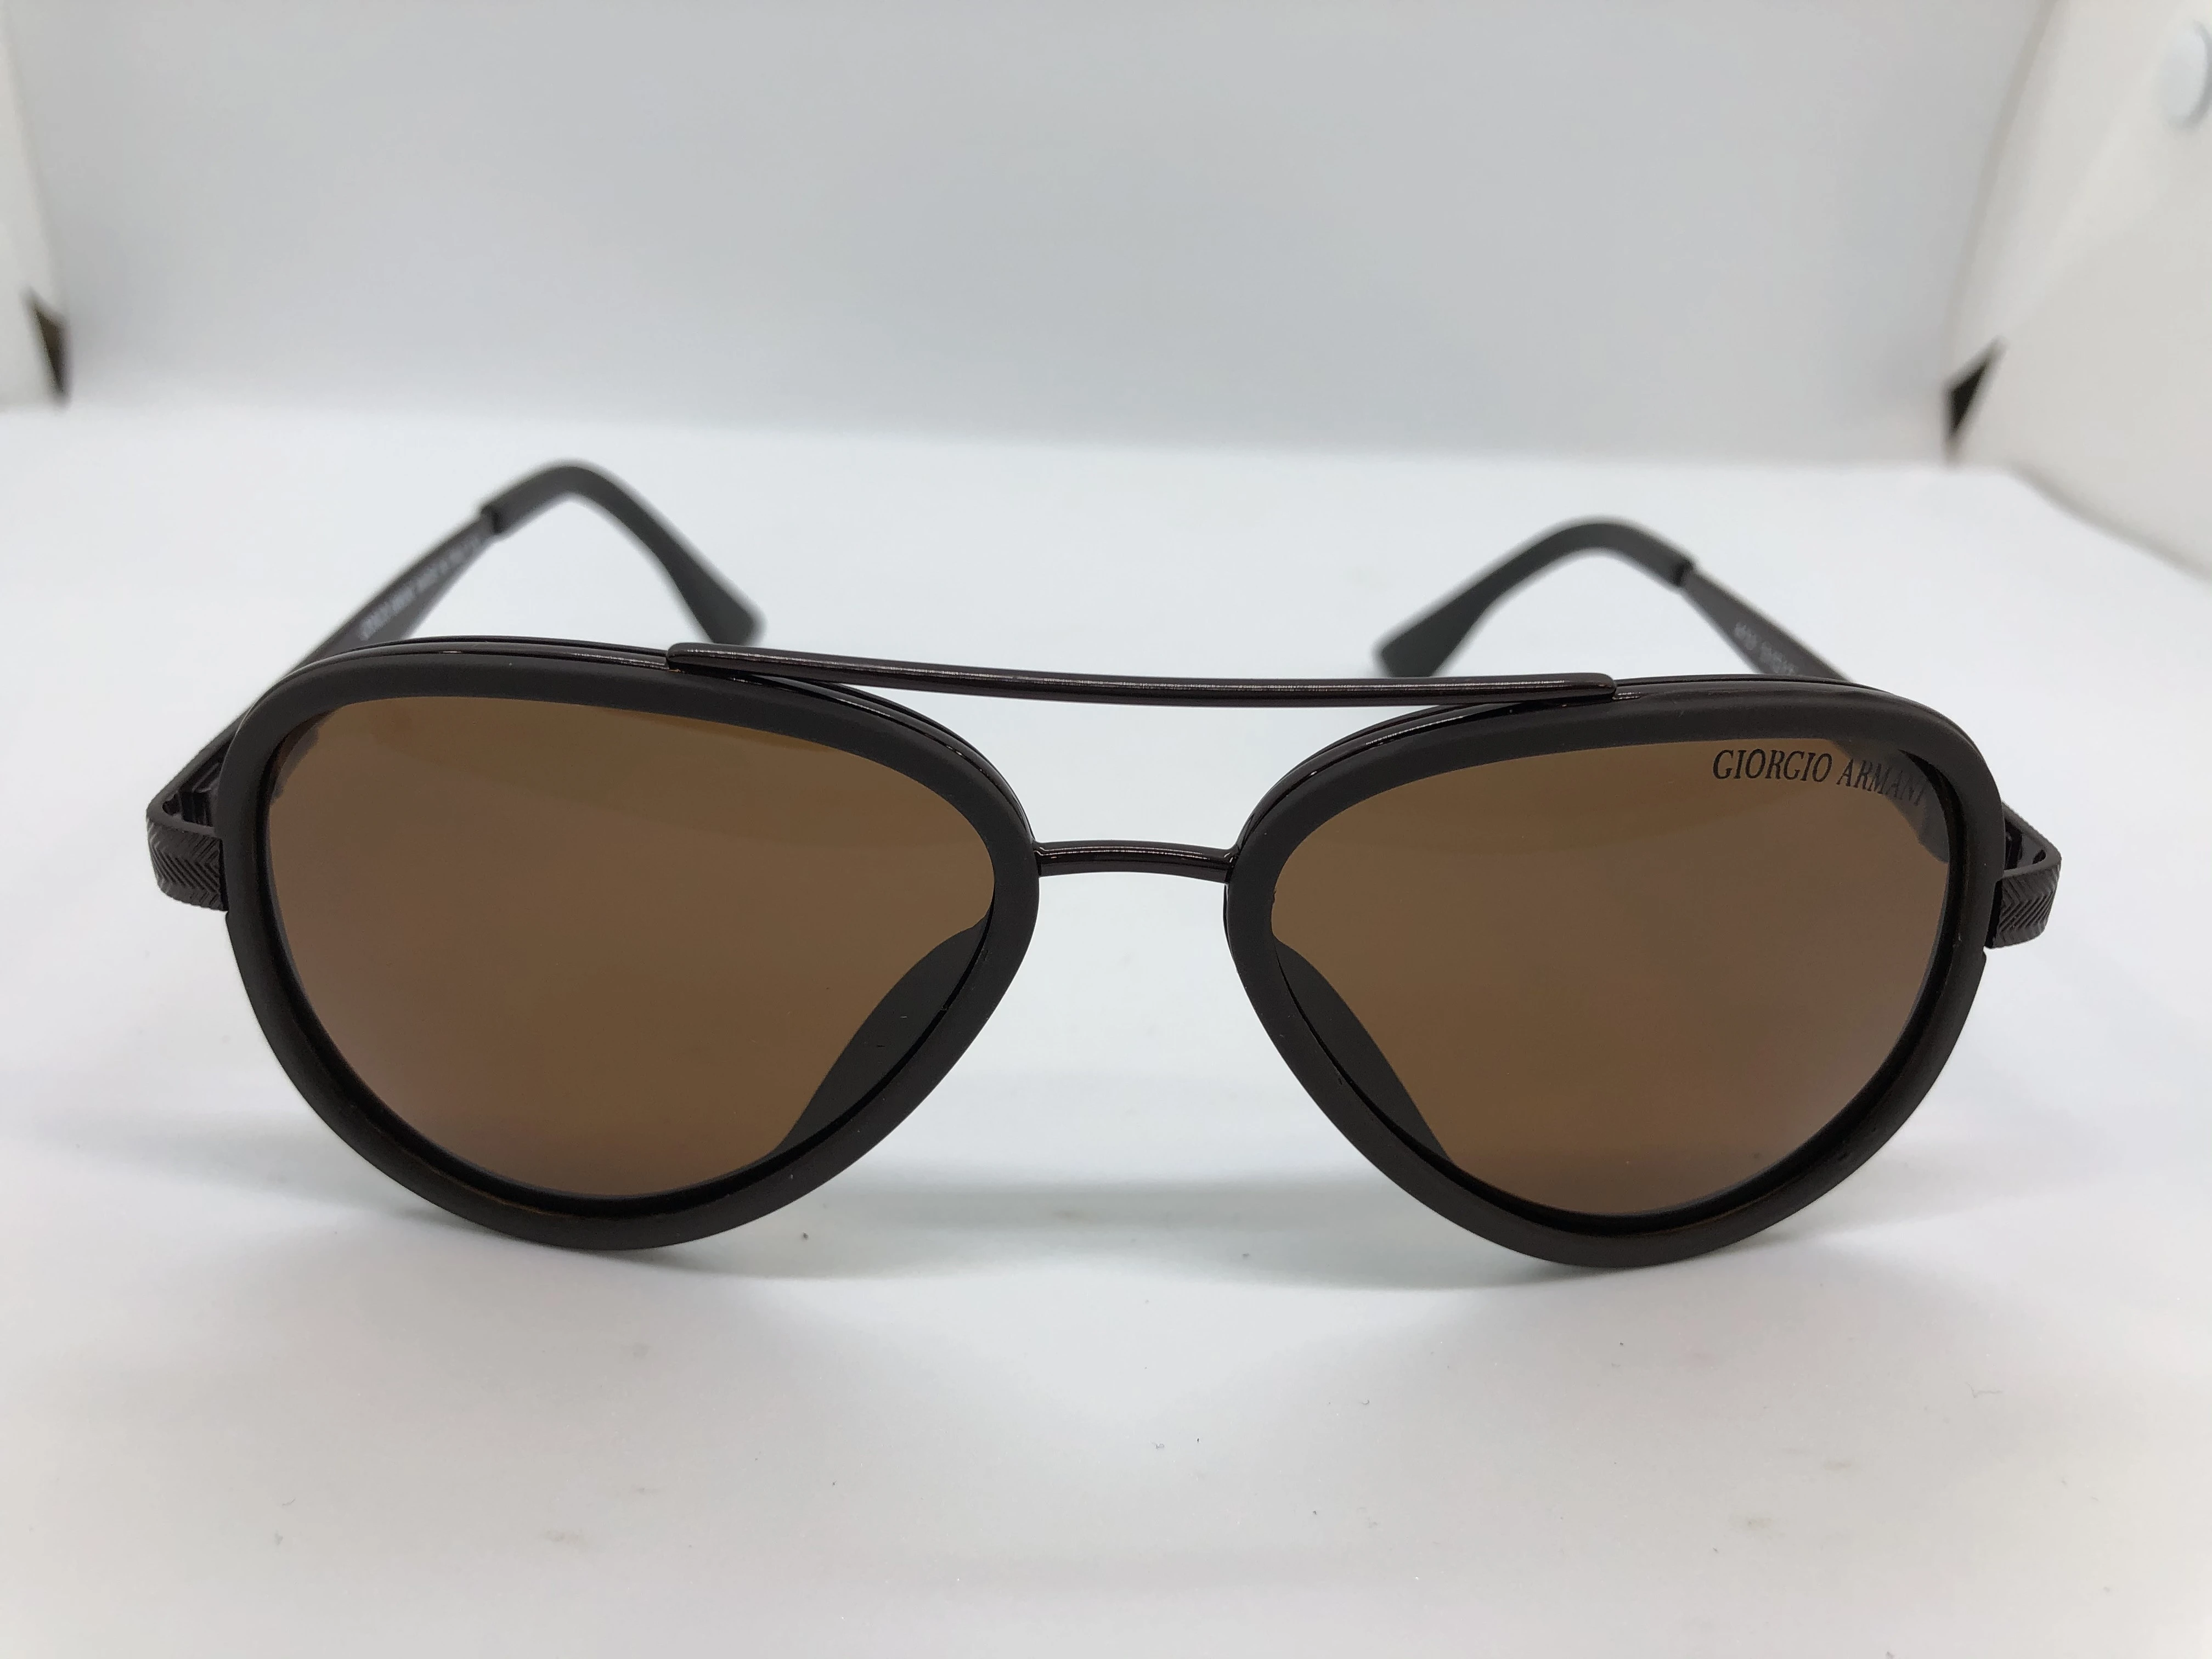 Sunglasses - by Giorgio Armani - with a dark brown frame polycarbonate and brown shiny metal - and brown lenses - and a dark brown metal frame - with a dark brown brand logo - for men